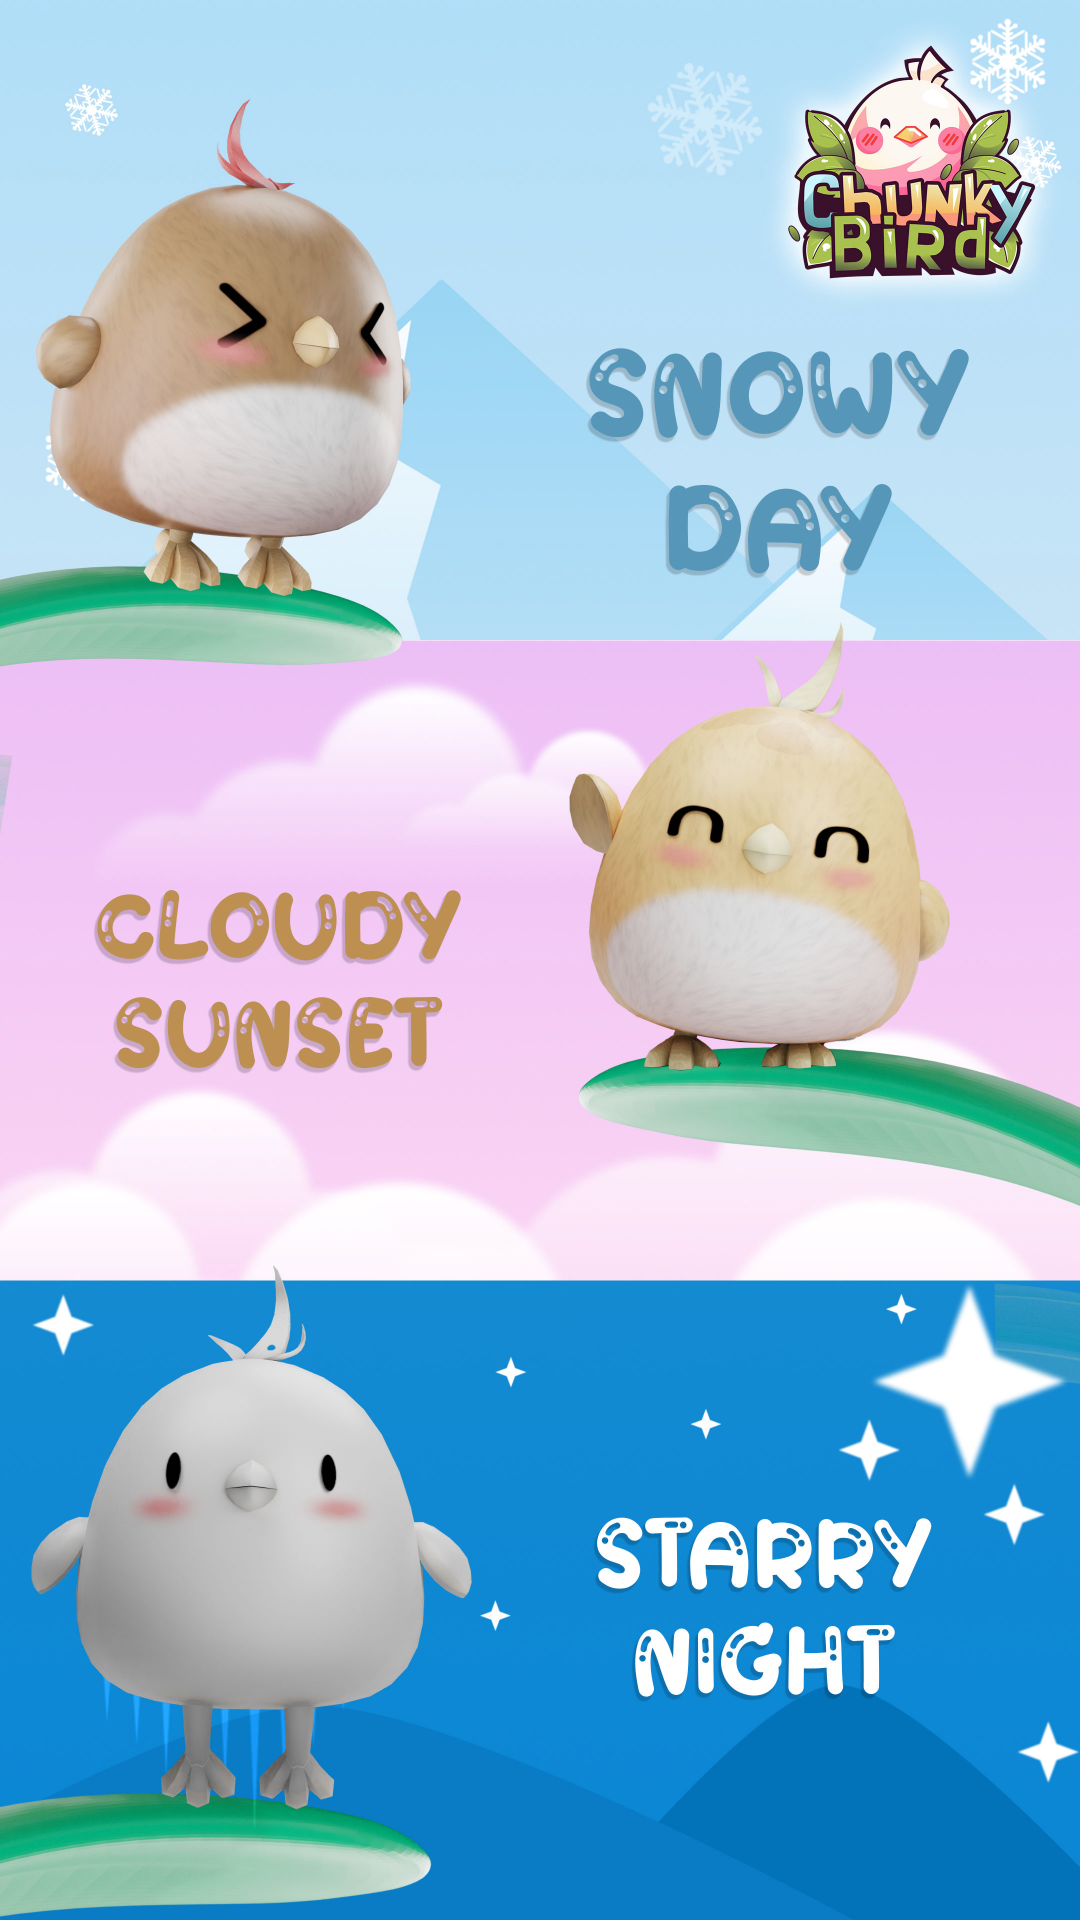 A screenshot of the ChunkyBird, featuring three enchanting environments starry night, cloudy sunset, and snowy day, each with its distinct charm